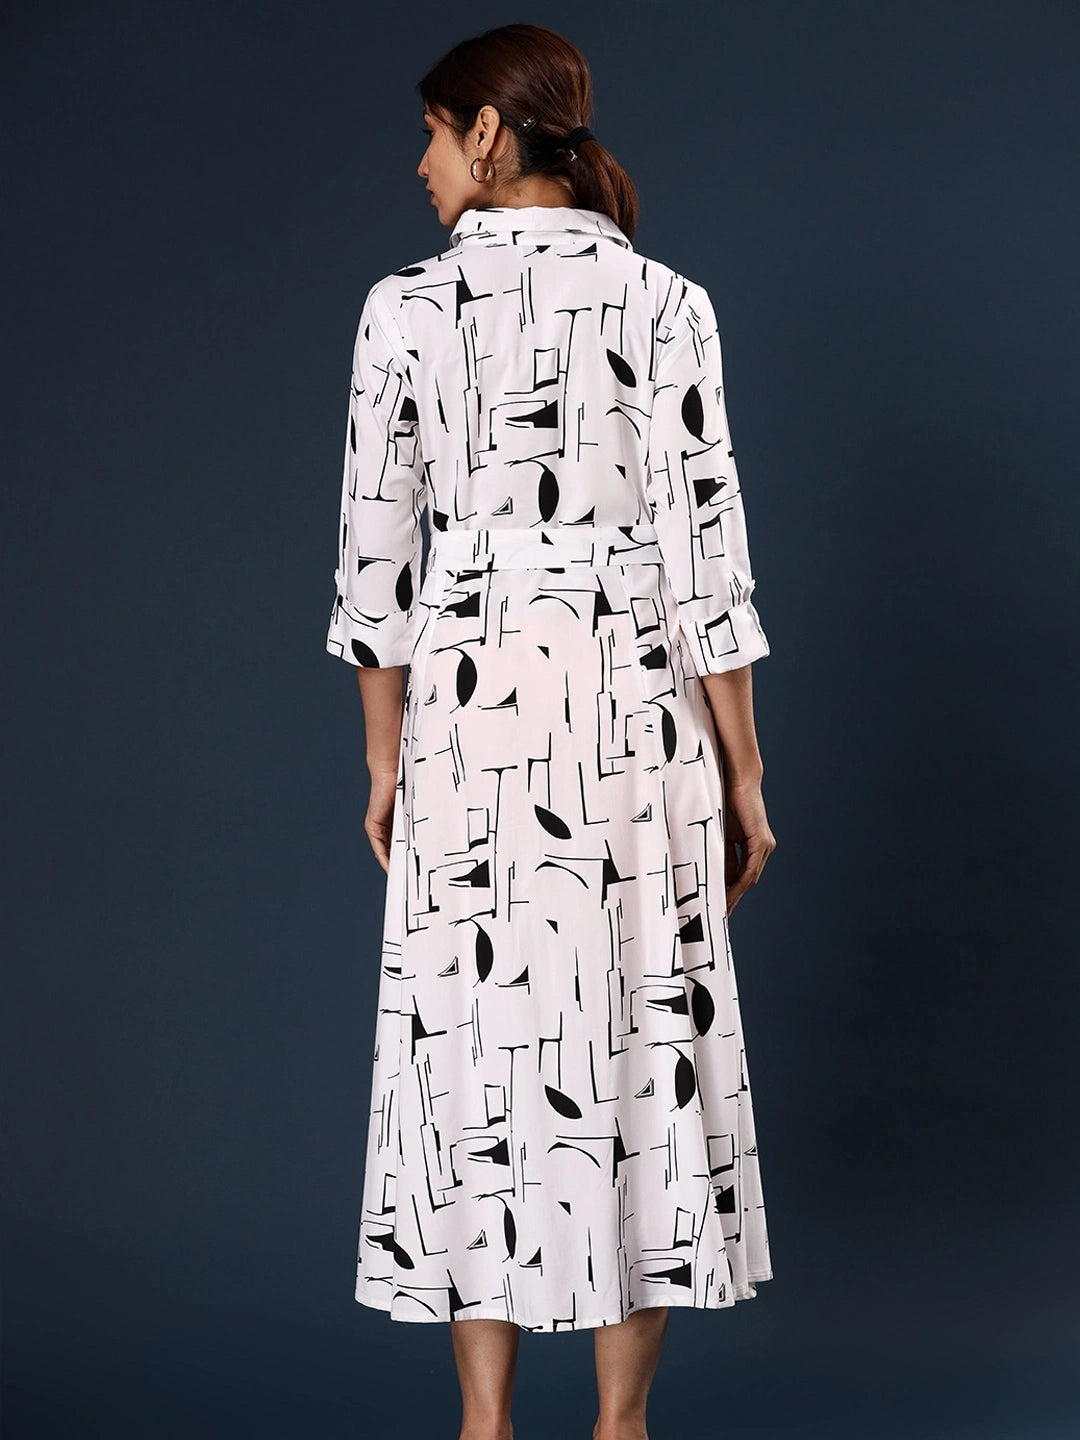 The Marble Print Gown